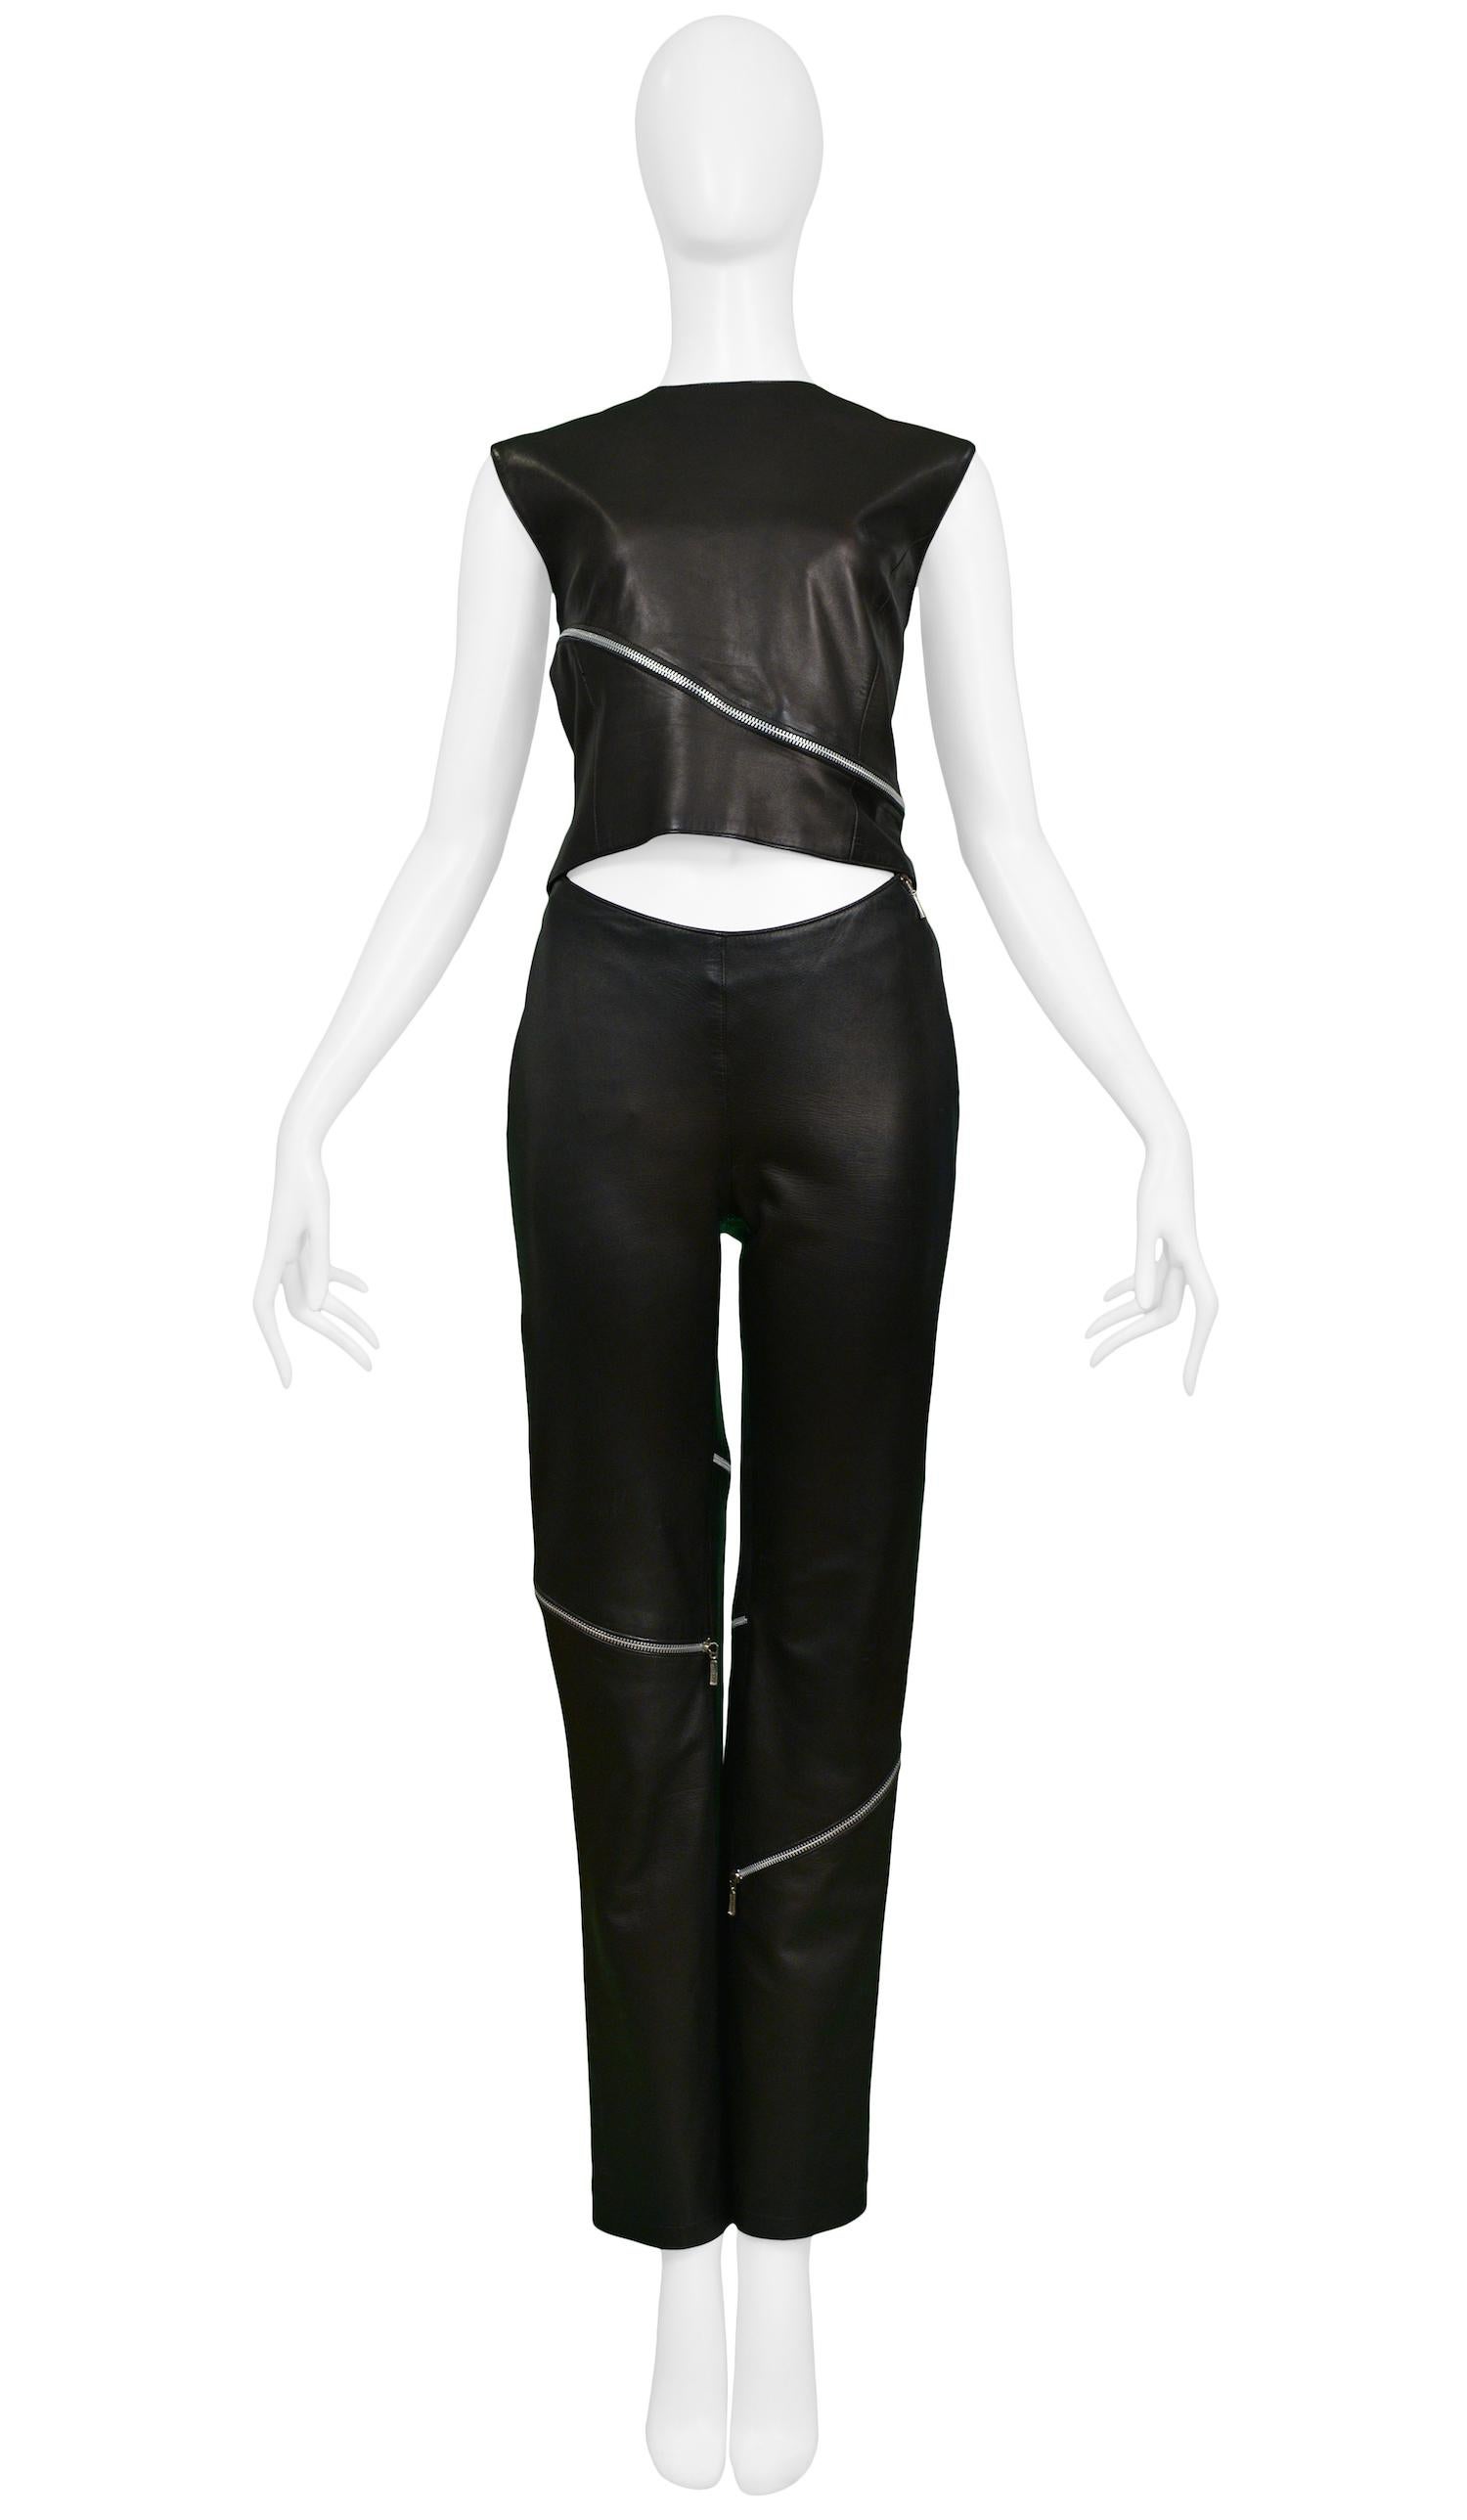 Black lambskin leather pants paired with crew neck leather top. Wrap around zipper detail on both pieces.

Excellent Condition.

Size 42

Top Measurements:
Shoulder 16